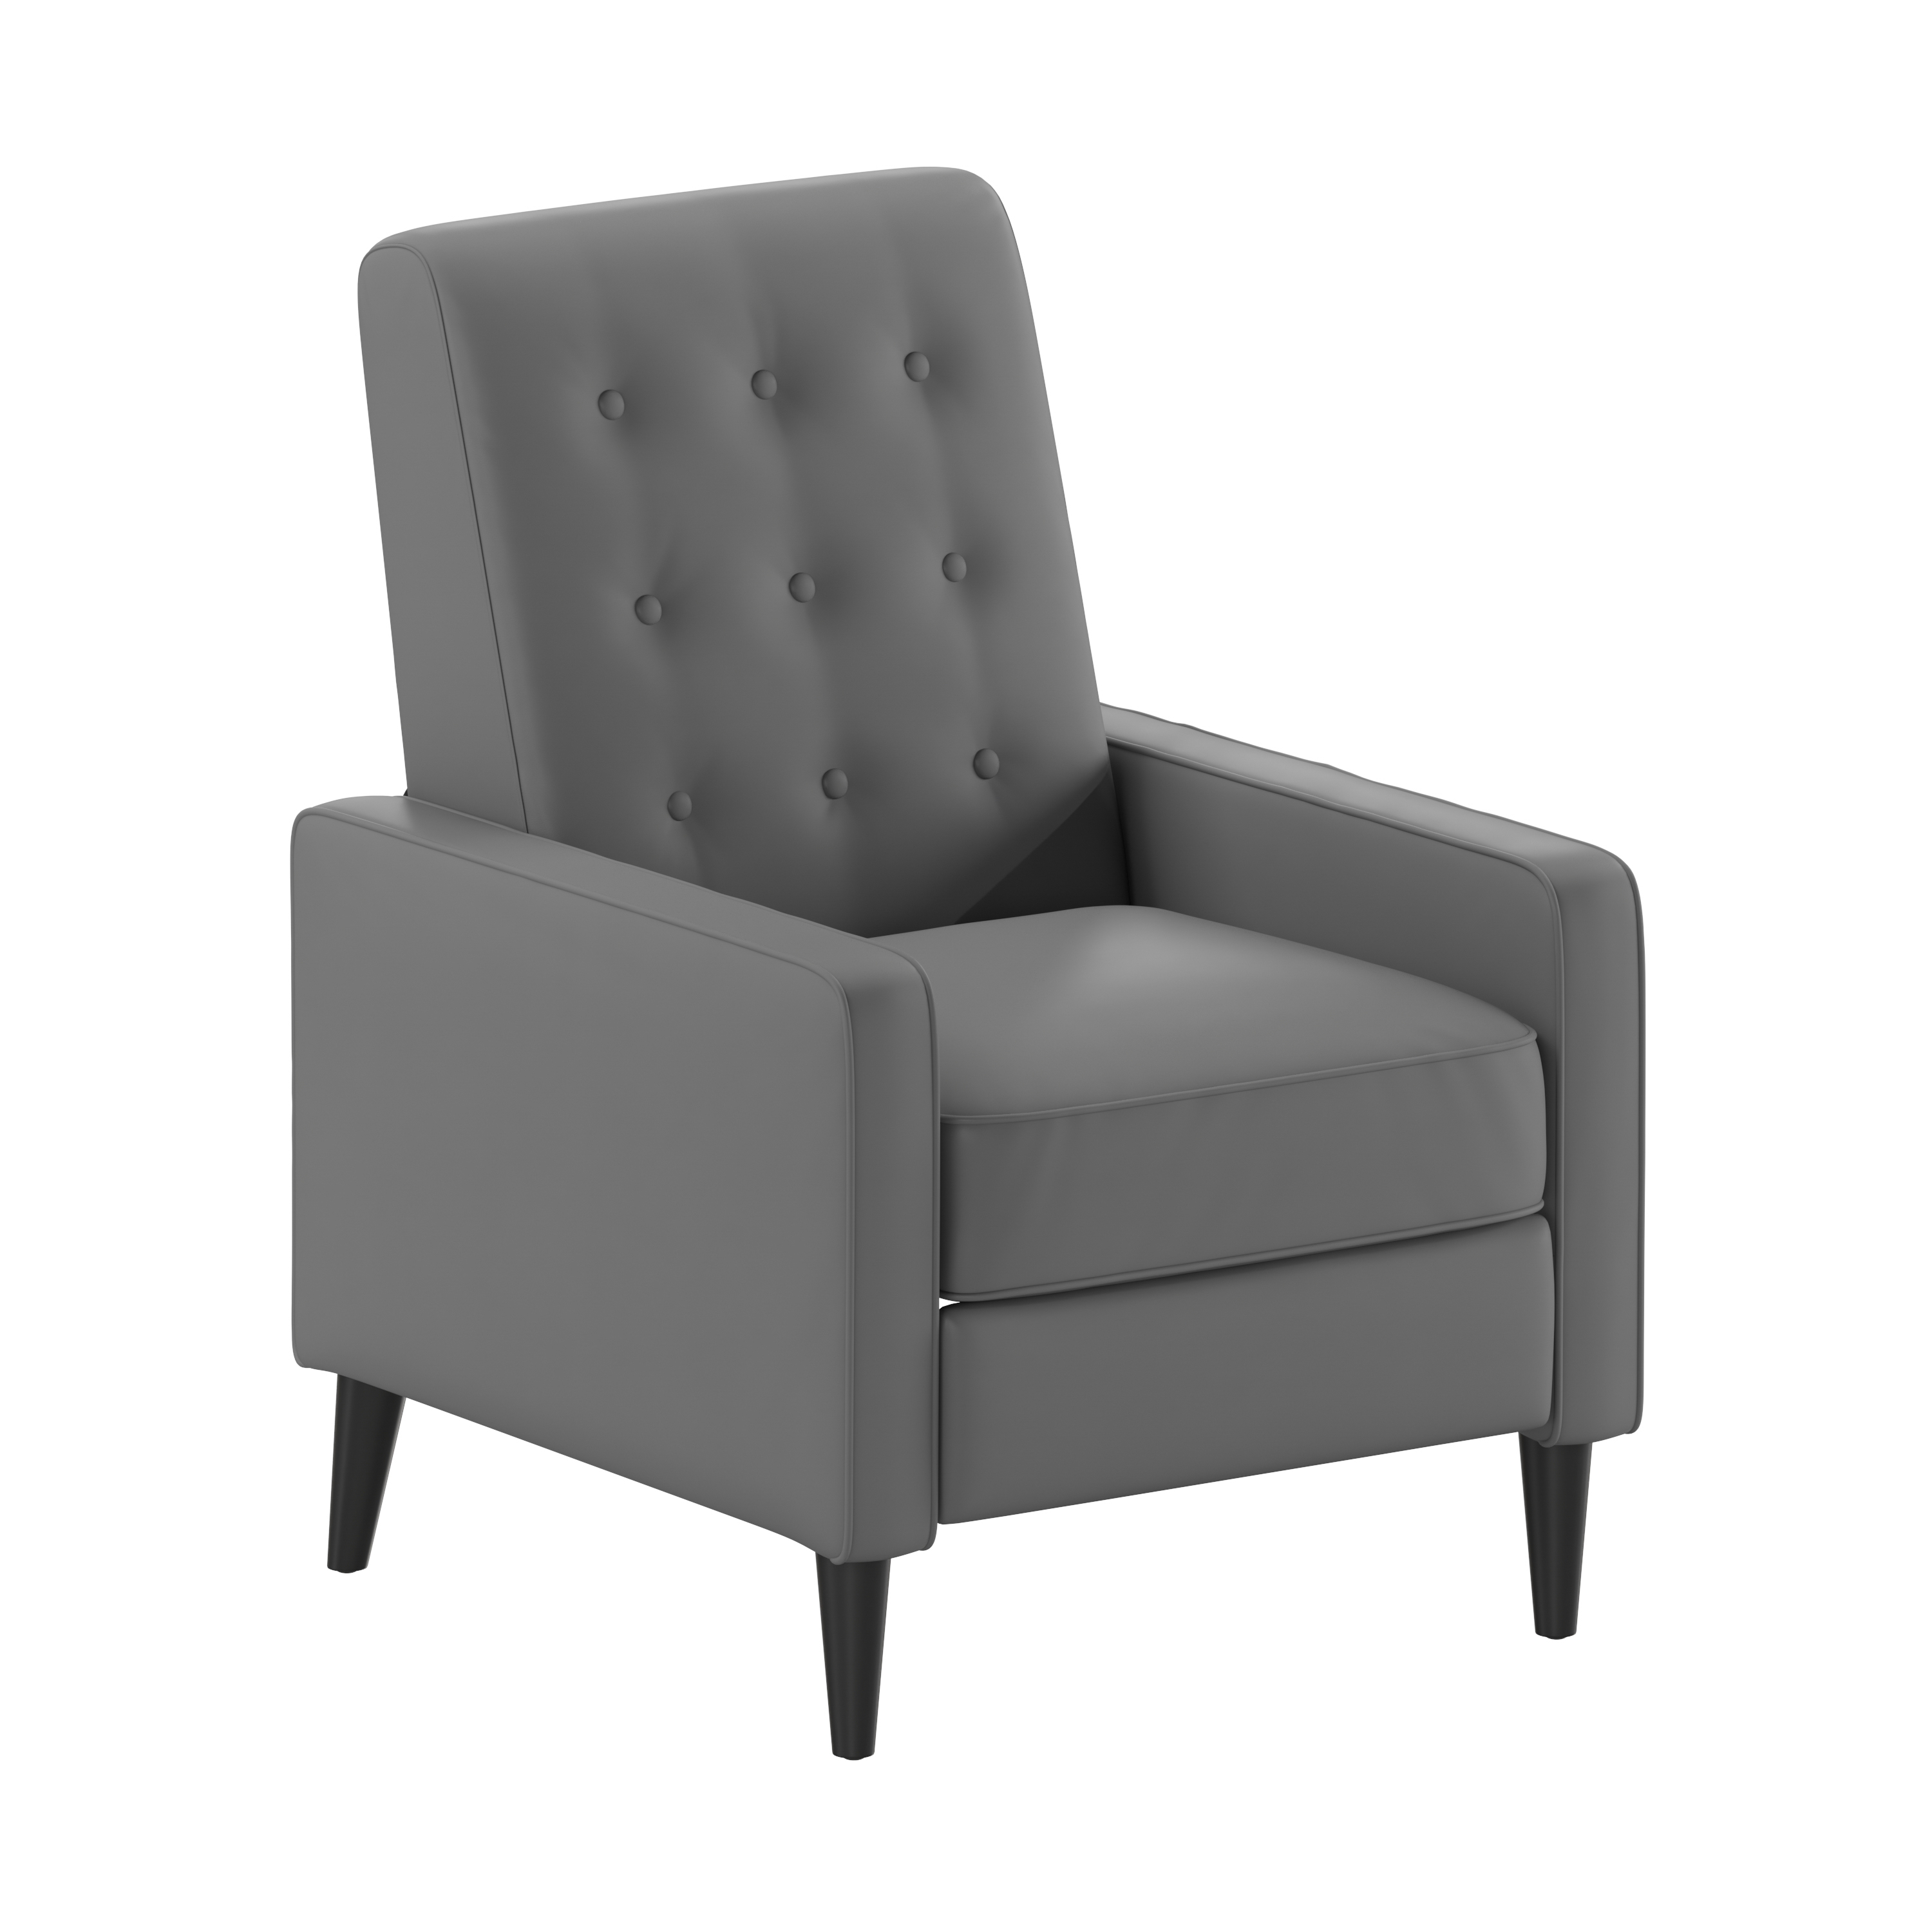 Flash Furniture SG-SX-80415N-LGY-GG Mid-Century Modern Light Gray LeatherSoft Upholstered Button Tufted Pushback Recliner